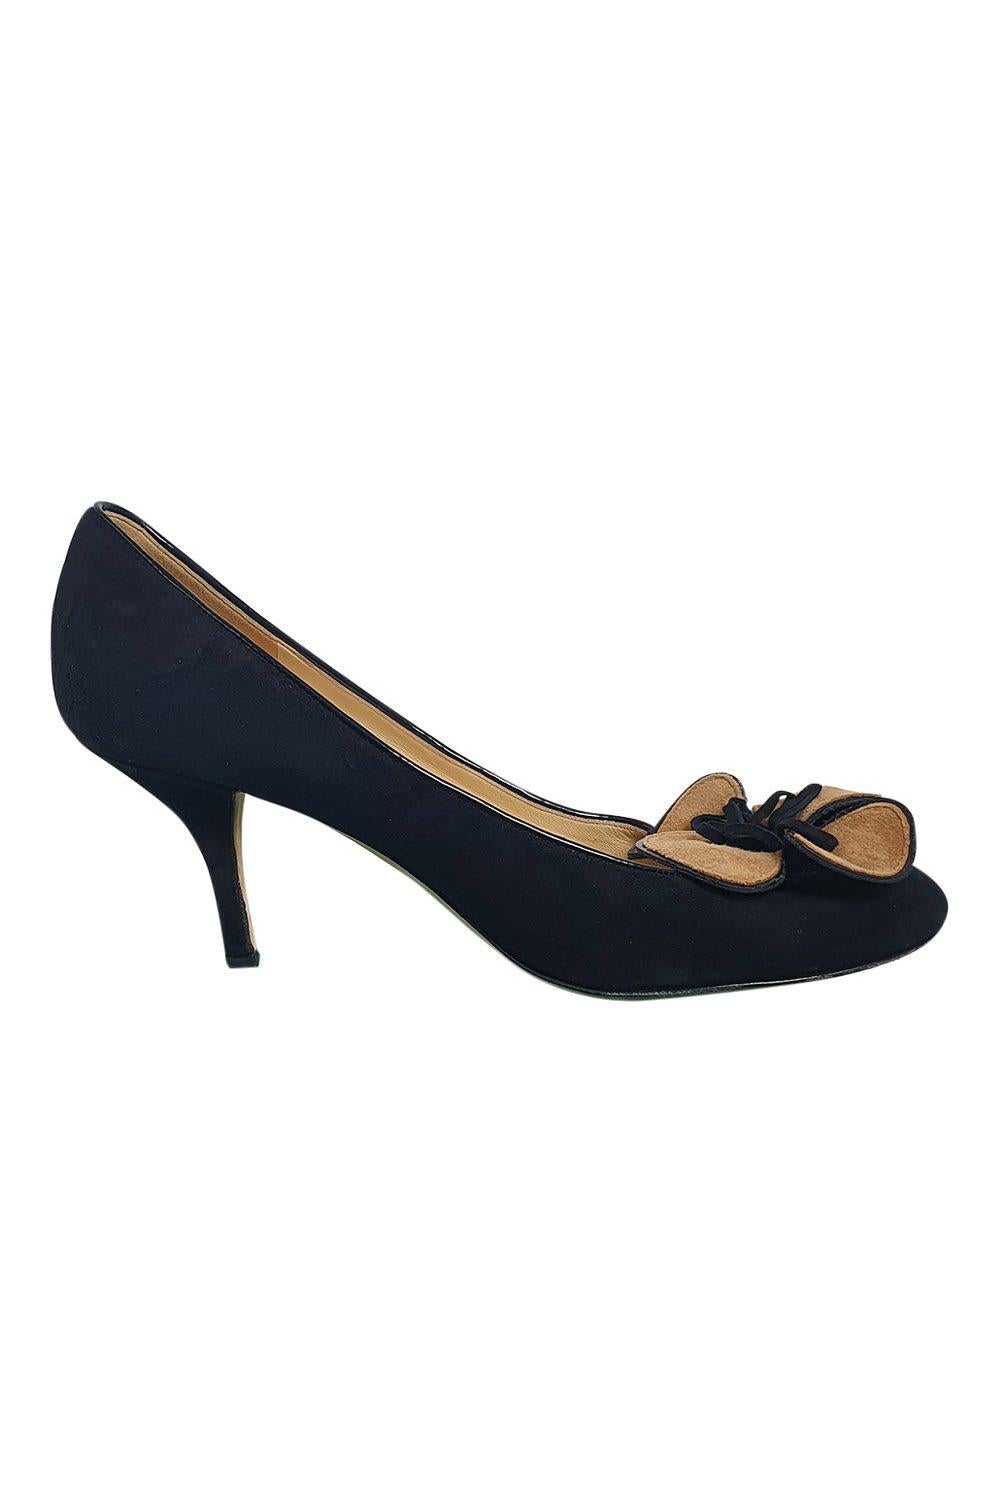 KATE SPADE New York Black Suede Suede Flower Pumps (US 91/2 | UK 6.5)-The Freperie